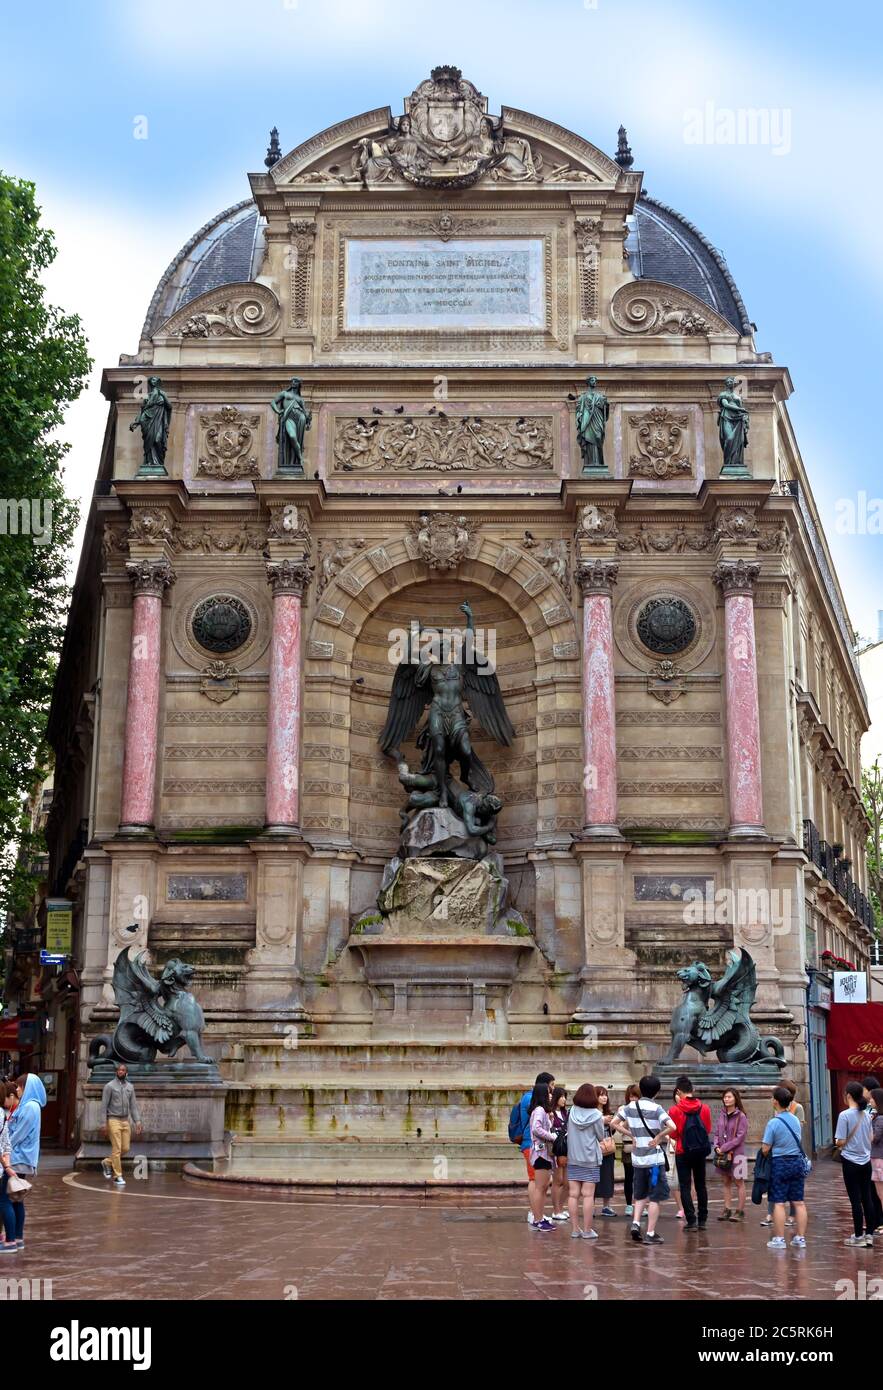 PARIS, FRANCE - JUNE 9: Fountain Saint-Michel at Place Saint-Michel on June 9, 2014 in Paris, France. It was constructed in 1858-1860 during French Se Stock Photo